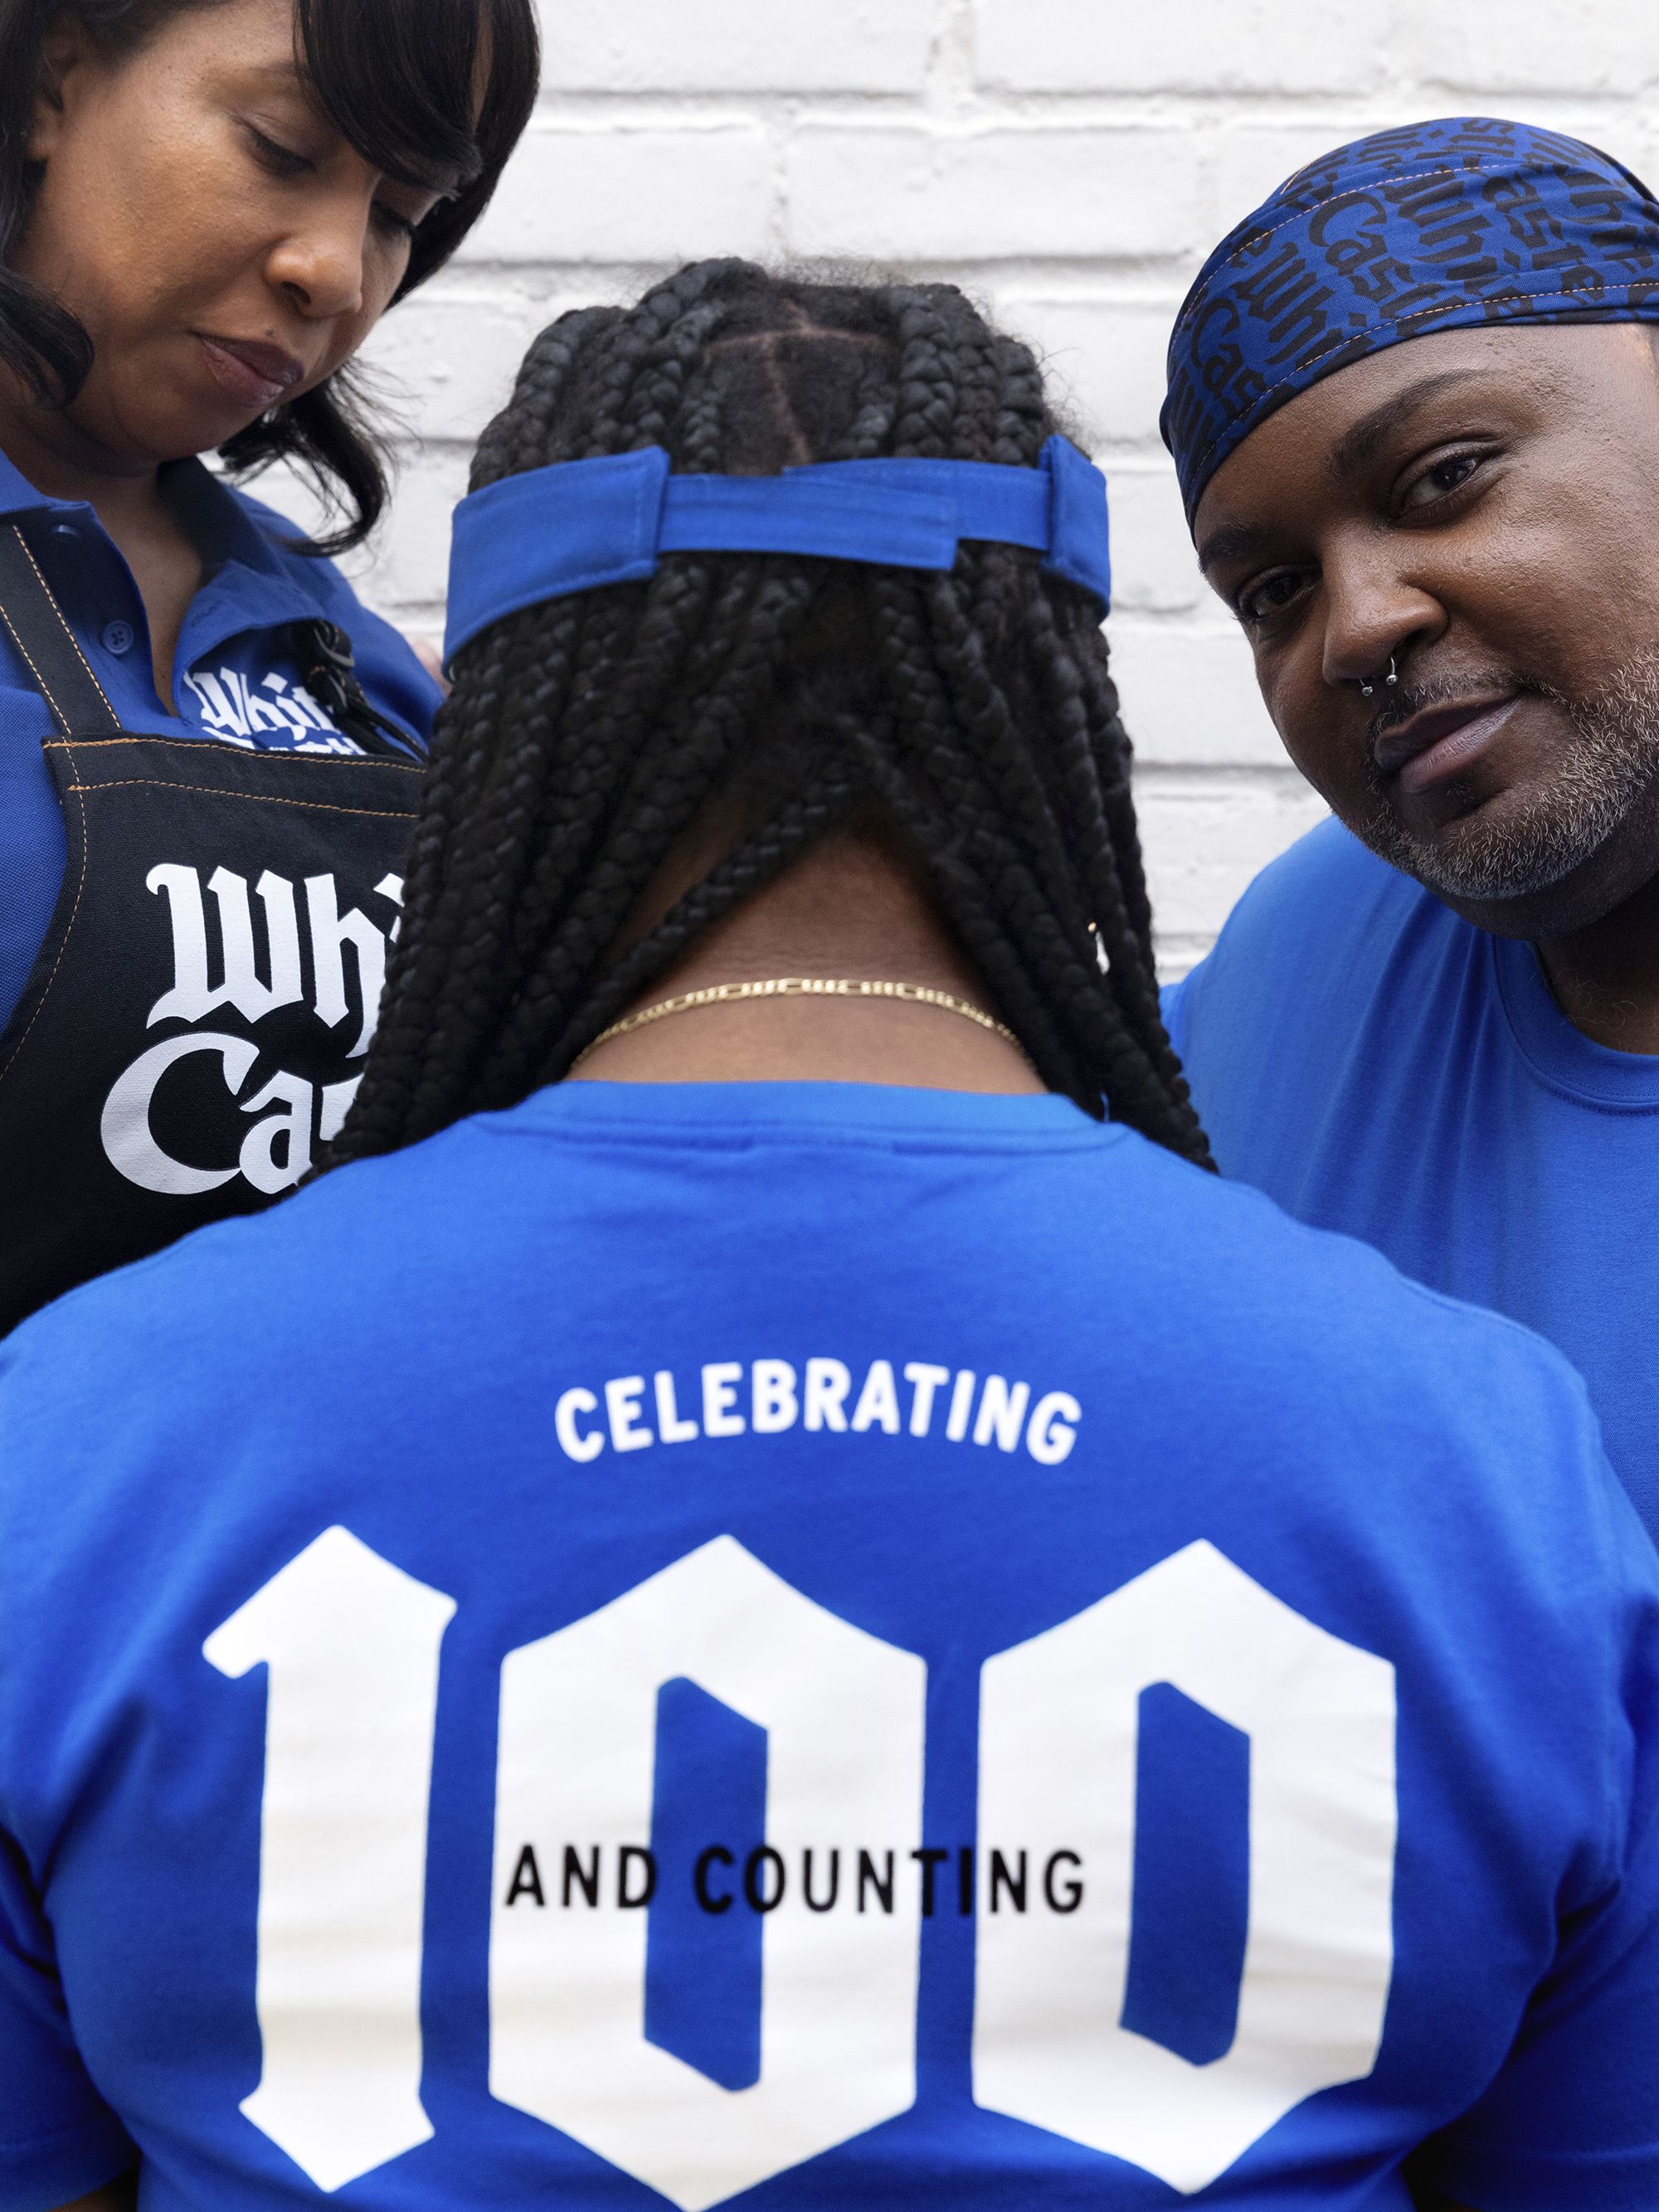 Telfar designed uniforms for White Castle employees, as well as a collection celebrating the chain’s 100th anniversary that it sold to the public. Profits from the collection were donated to the Robert F. Kennedy Human Rights Liberty and Justice Fund, which provides bail money to jailed minors.